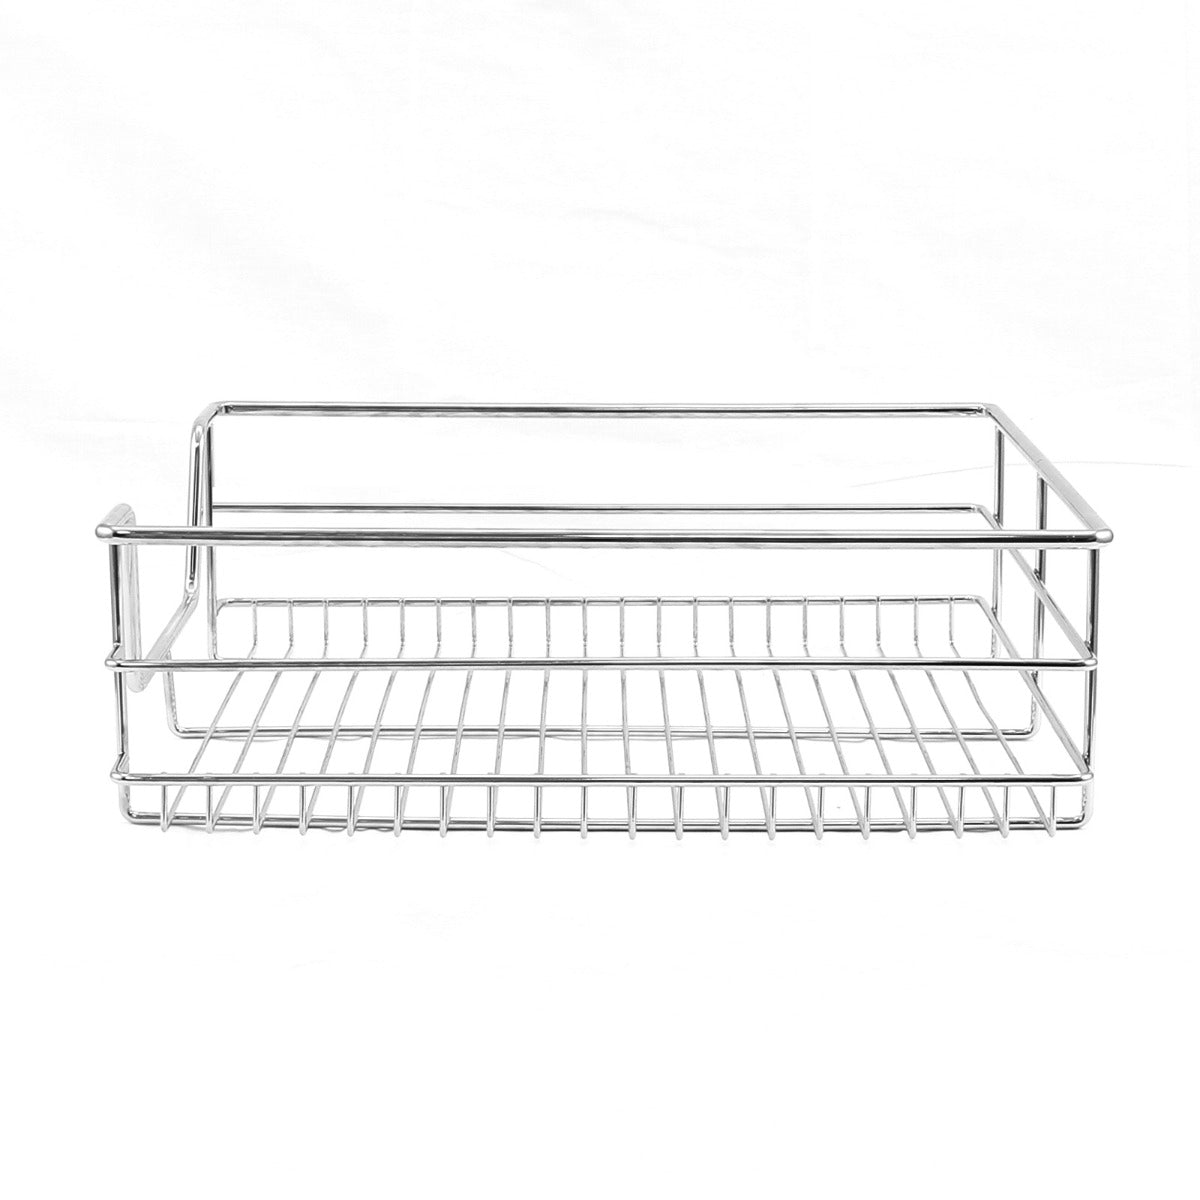 2 x KuKoo Kitchen Pull Out Storage Baskets – 500mm Wide Cabinet - Used - Very Good